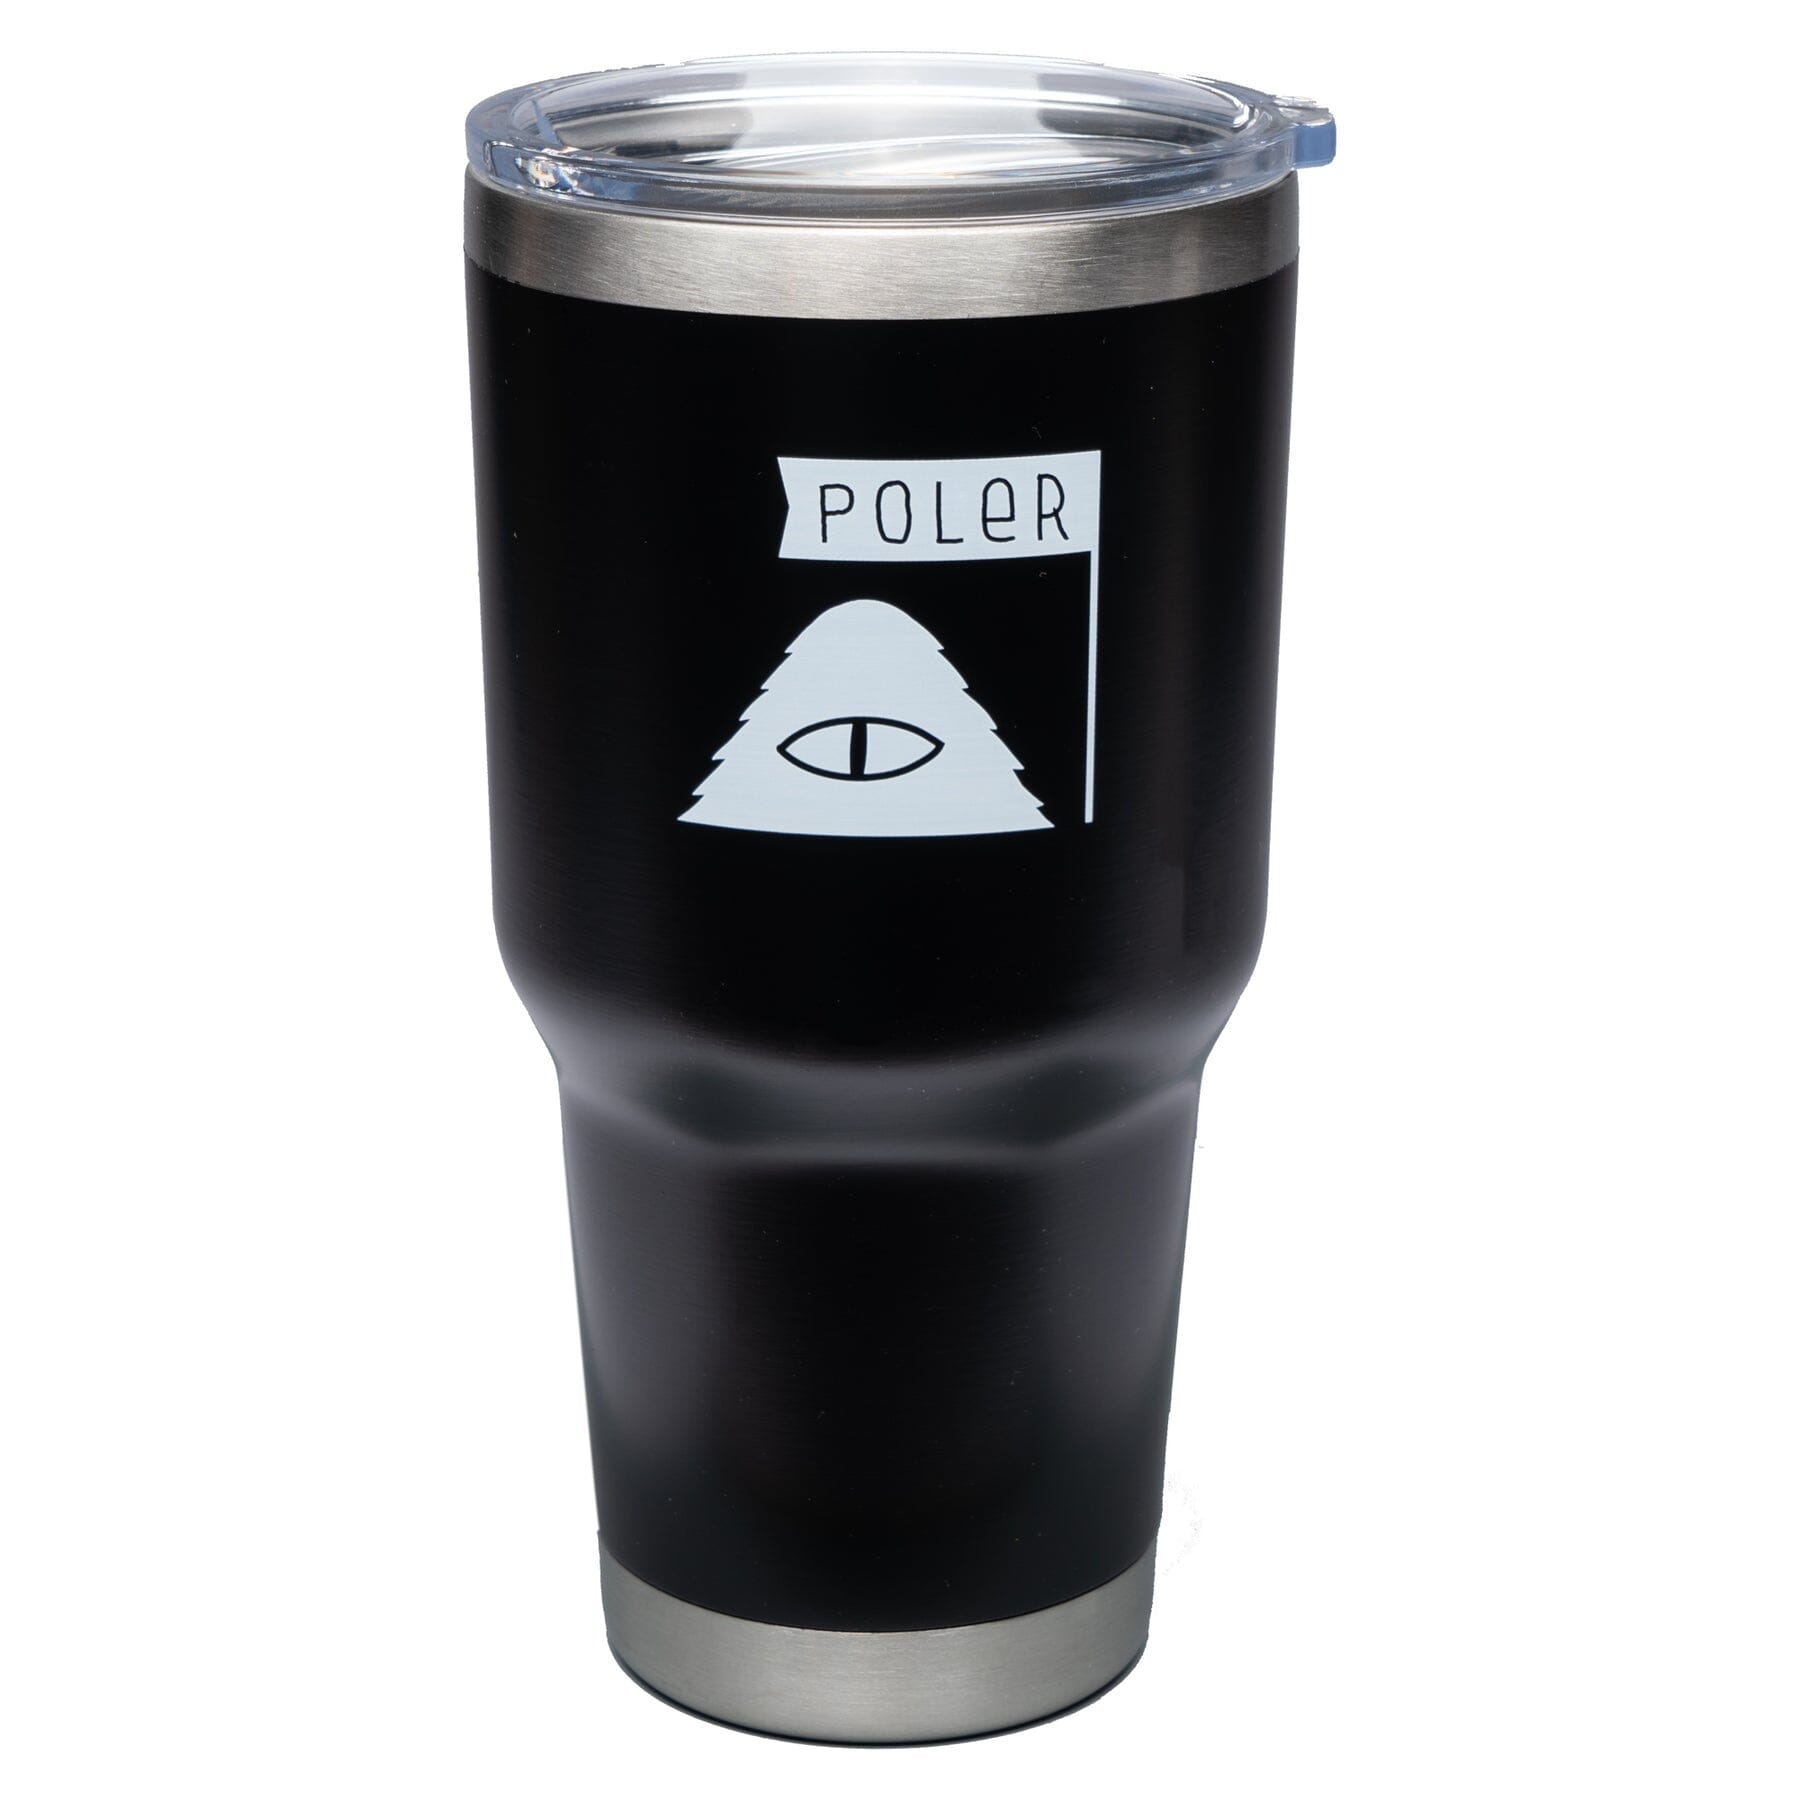 Poler 30oz Stainless Tumbler Fossil Fuel accessories Poler 